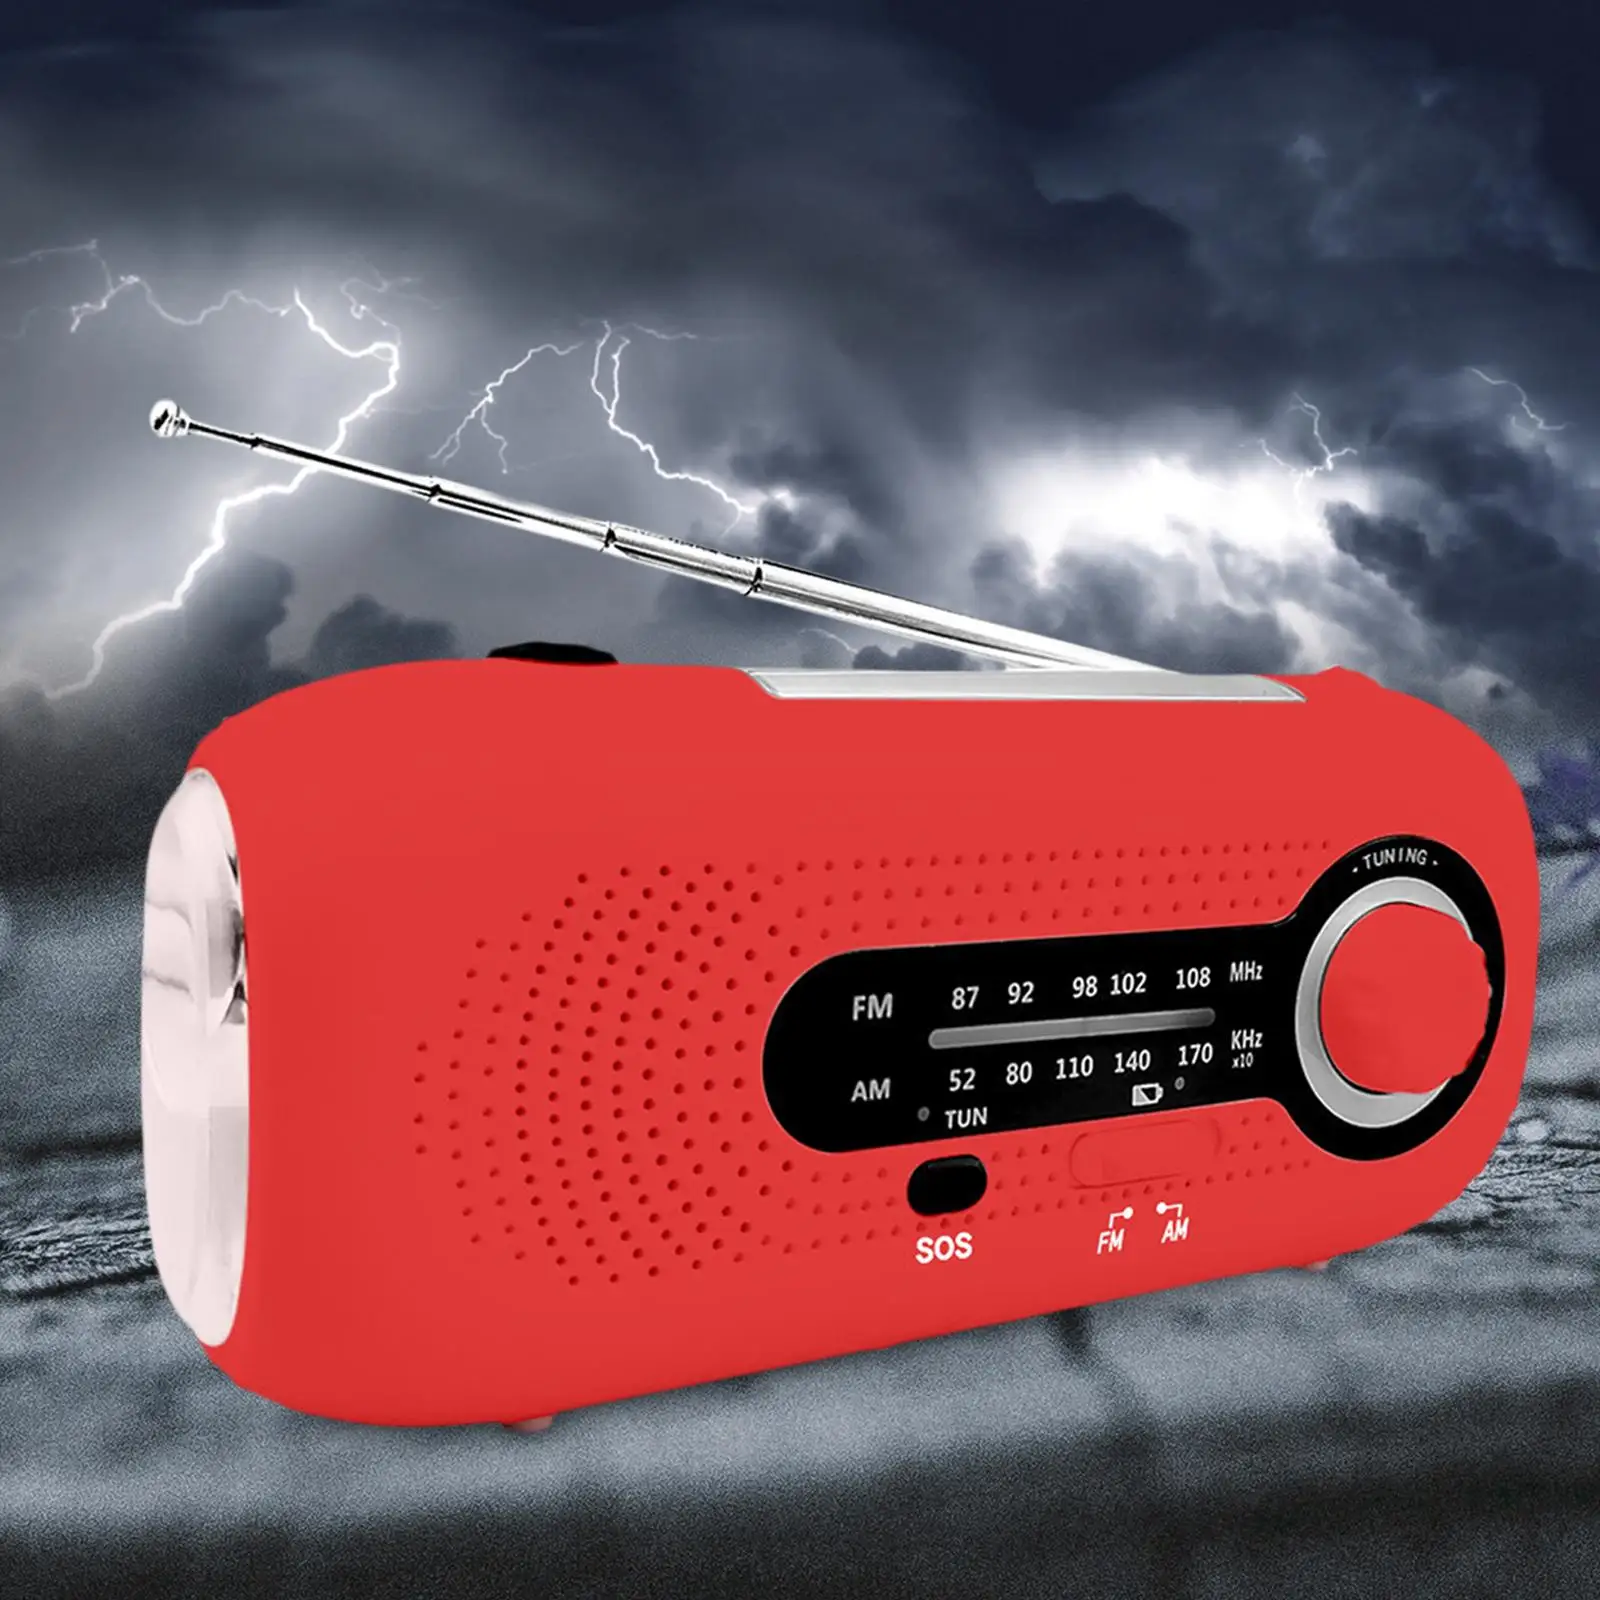 Portable Weather Radio, 2000mAh Rechargeable Battery Cell Phone Charger Reading Lamp LED Flashlight Survival Radio for Emergency